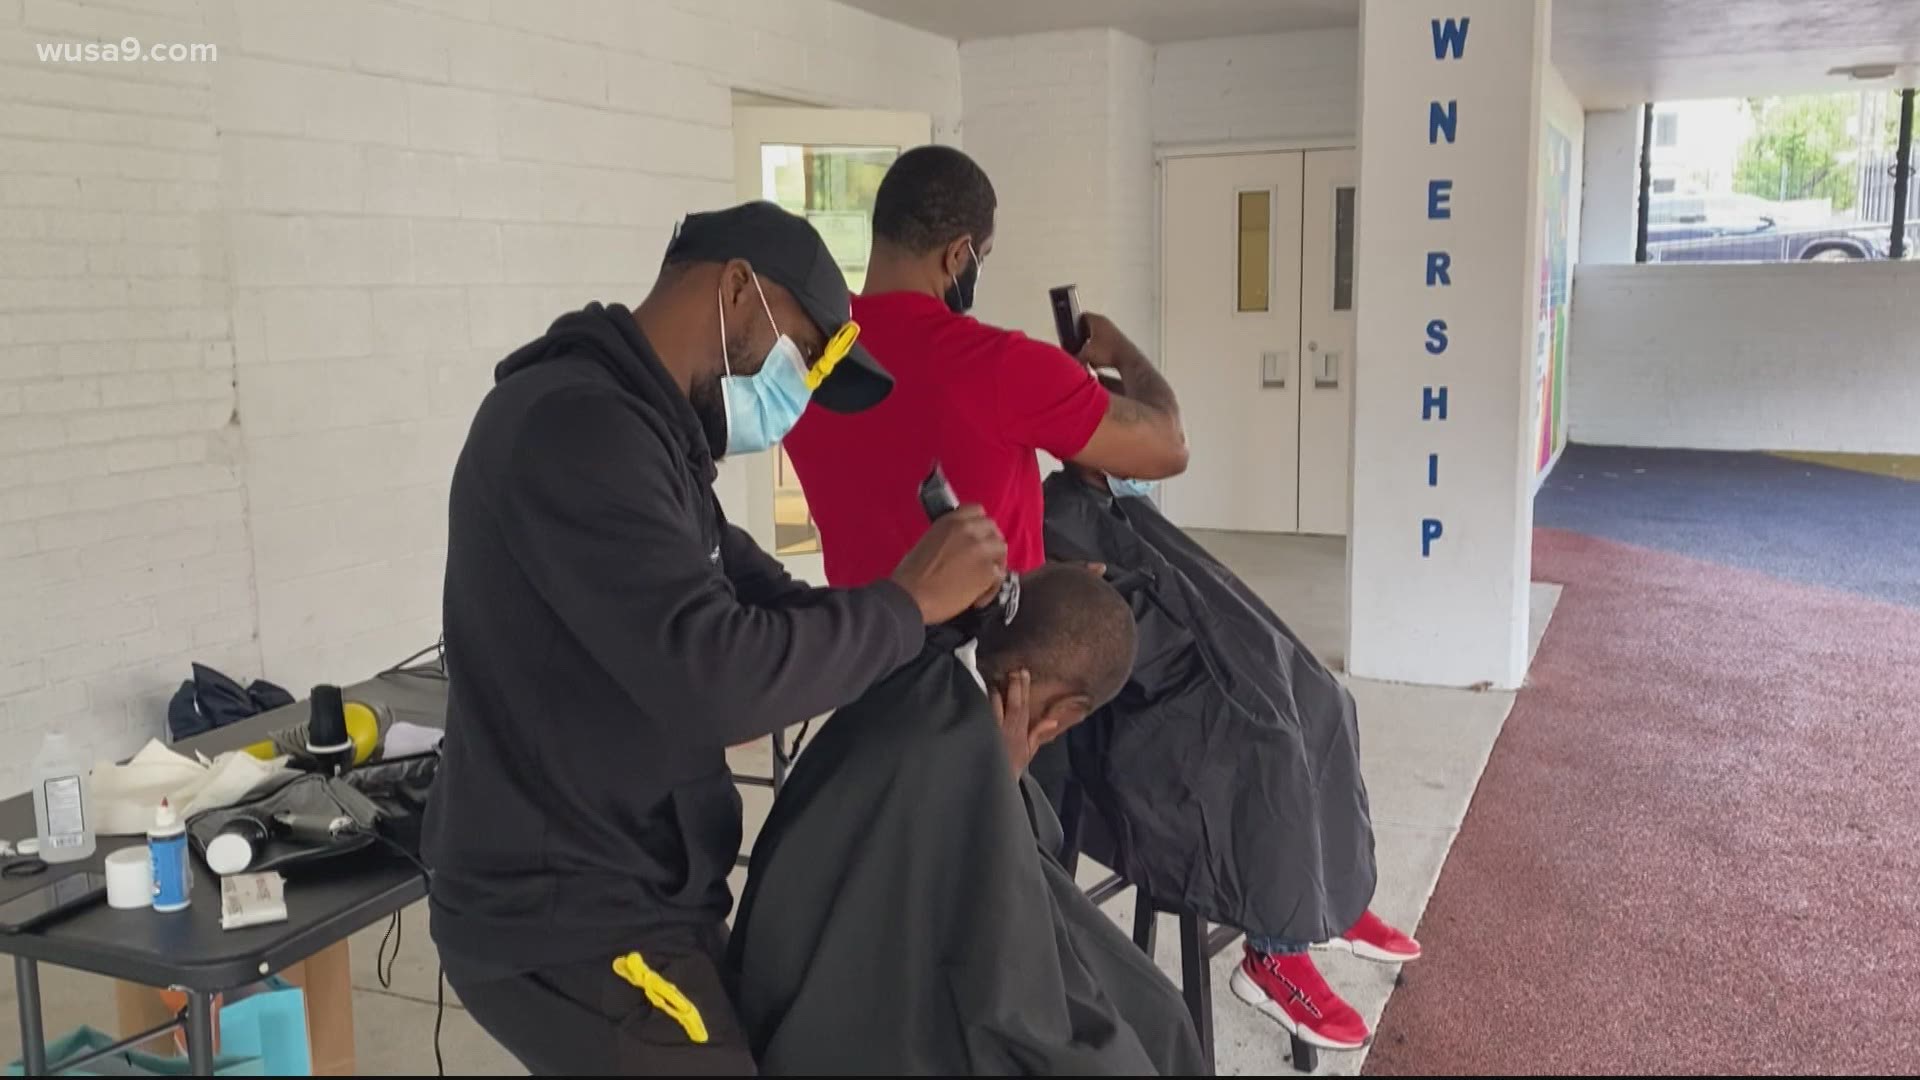 The nonprofit Competitive By Nature offers haircuts and confidence.